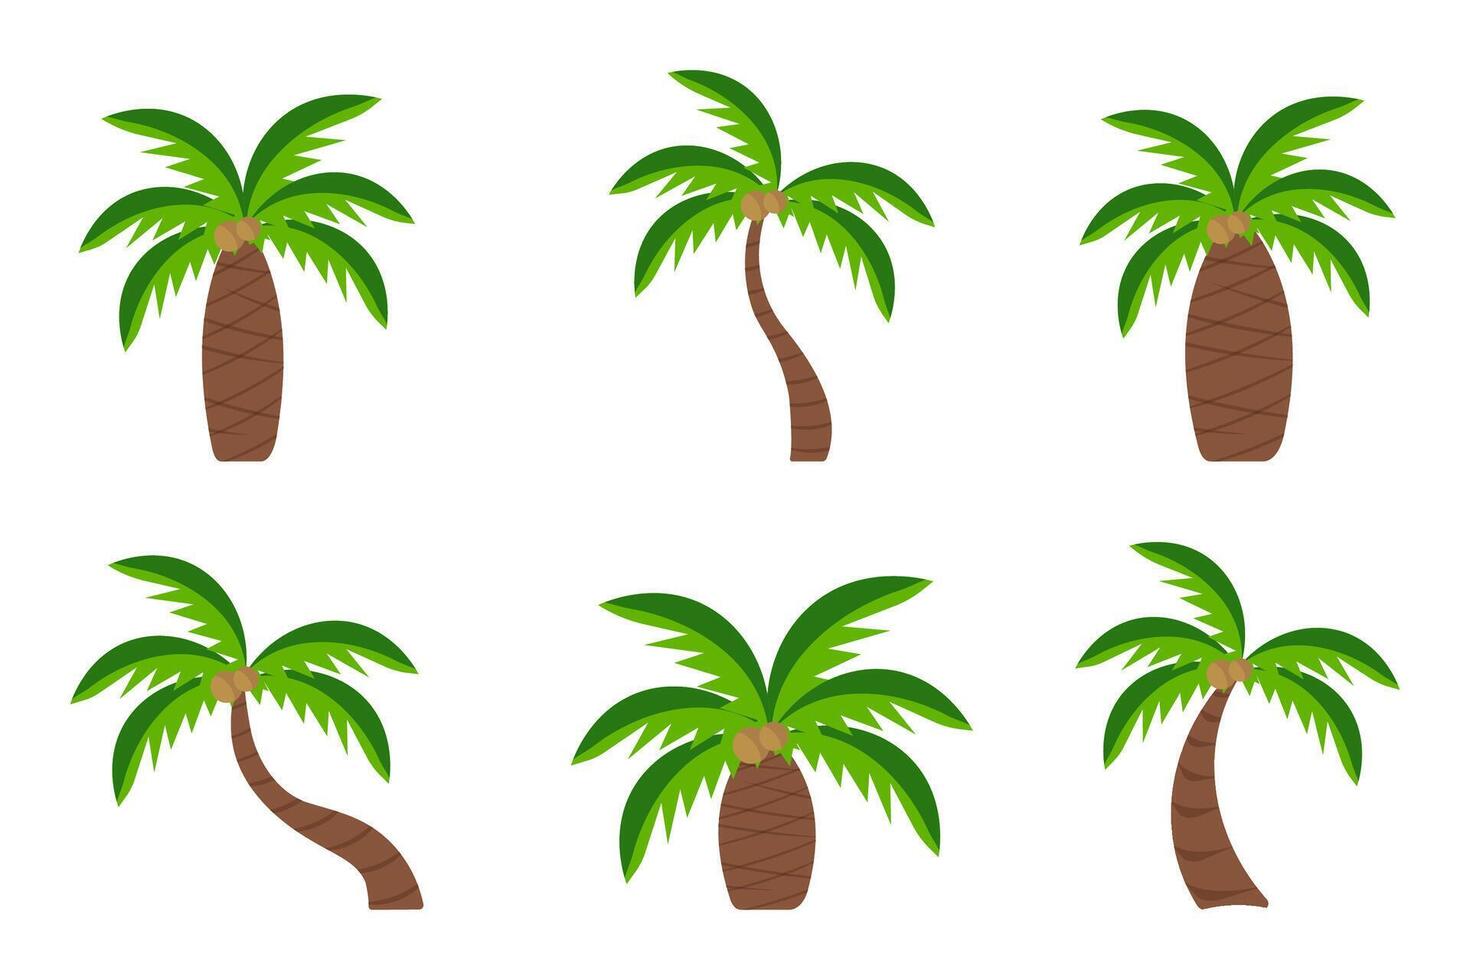 Flat vector set of palm trees. Plants of the tropical forest. Landscape elements for a mobile game